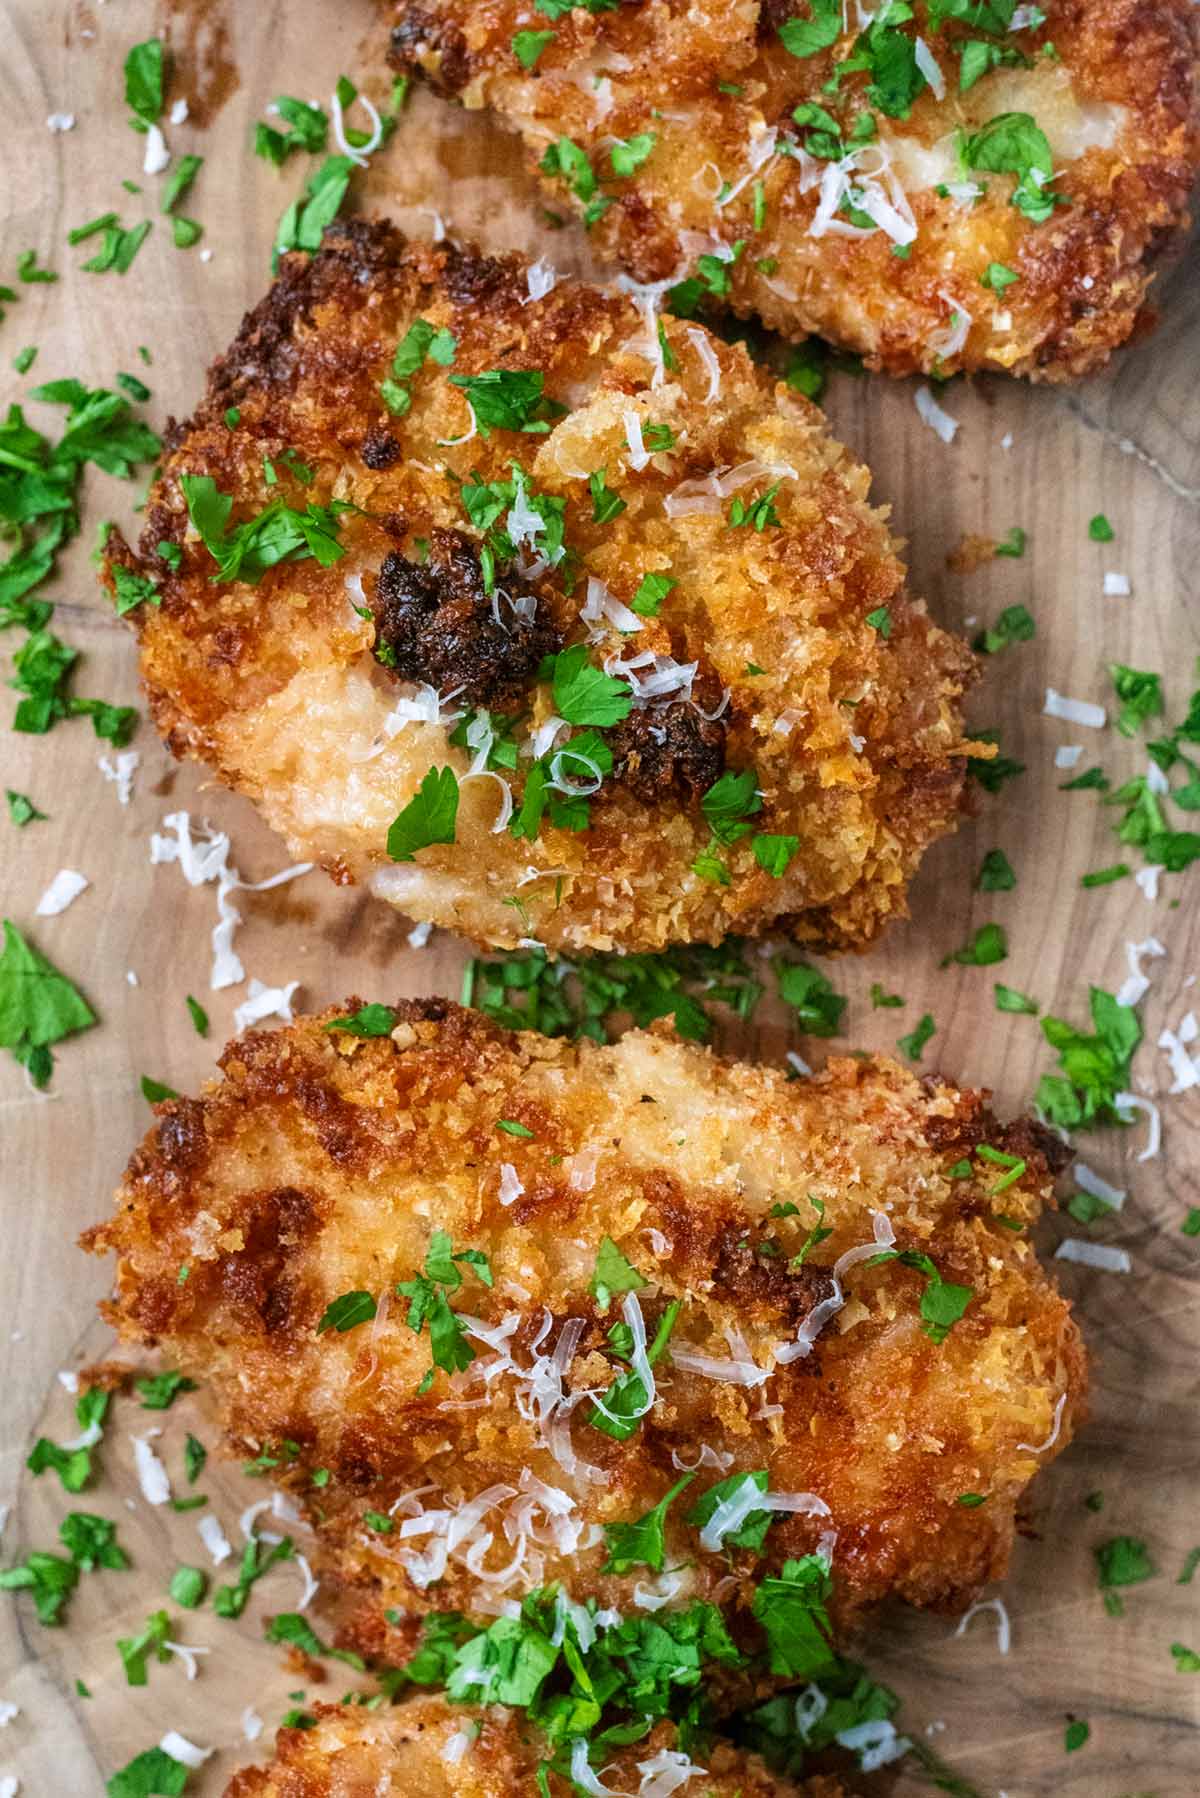 Golden breadcrumb coated chicken breasts with chopped herbs scattered over them.